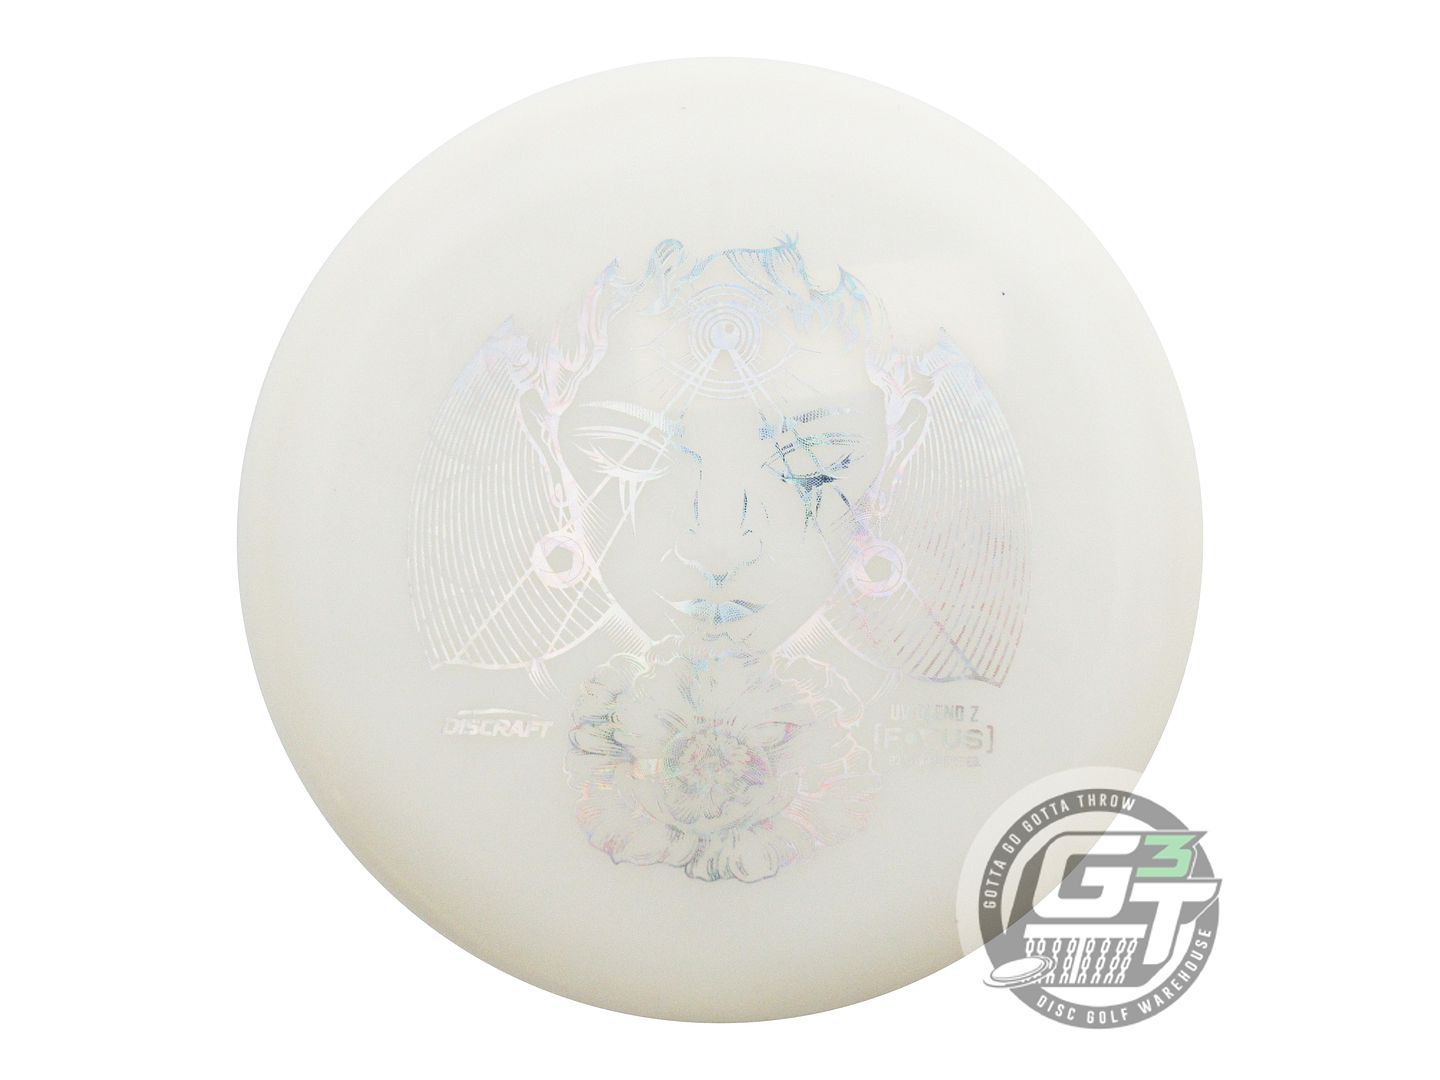 Discraft Limited Edition 2023 Ledgestone Open UV CryZtal Z Focus Putter Golf Disc (Individually Listed)